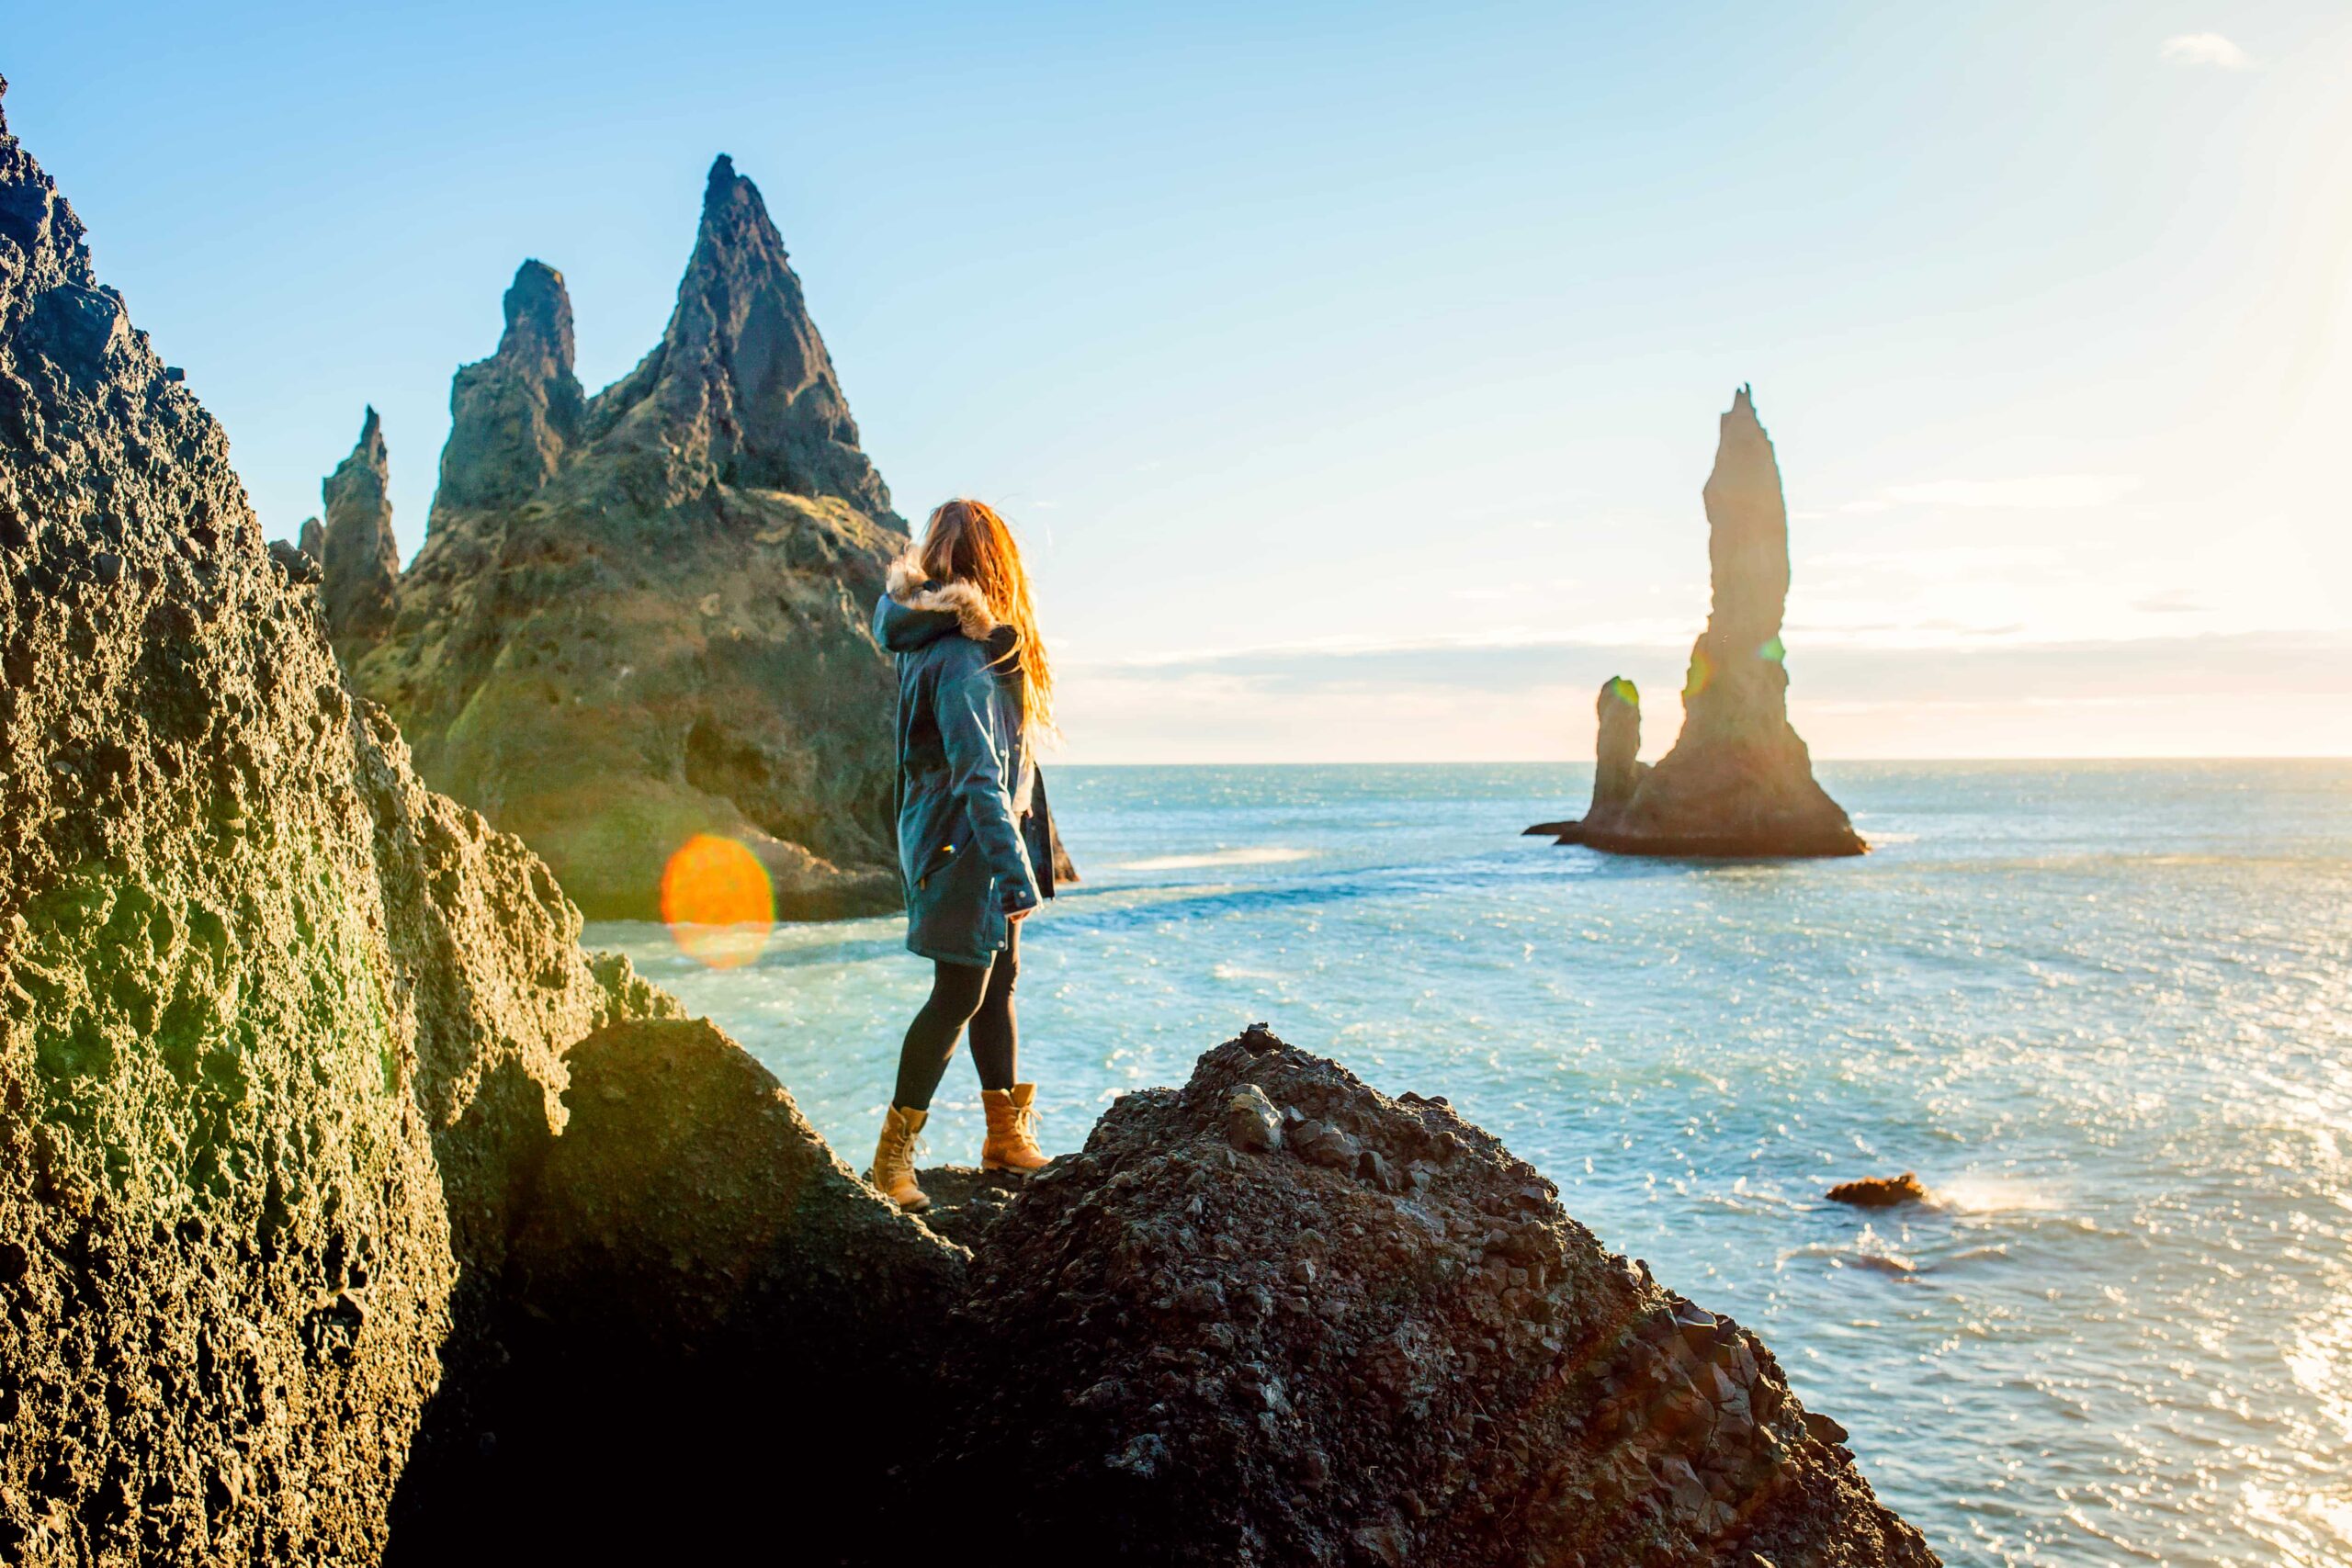 Woman standing on a rocky outcrop looking out at similar jagged rocks in the ocean nearby.